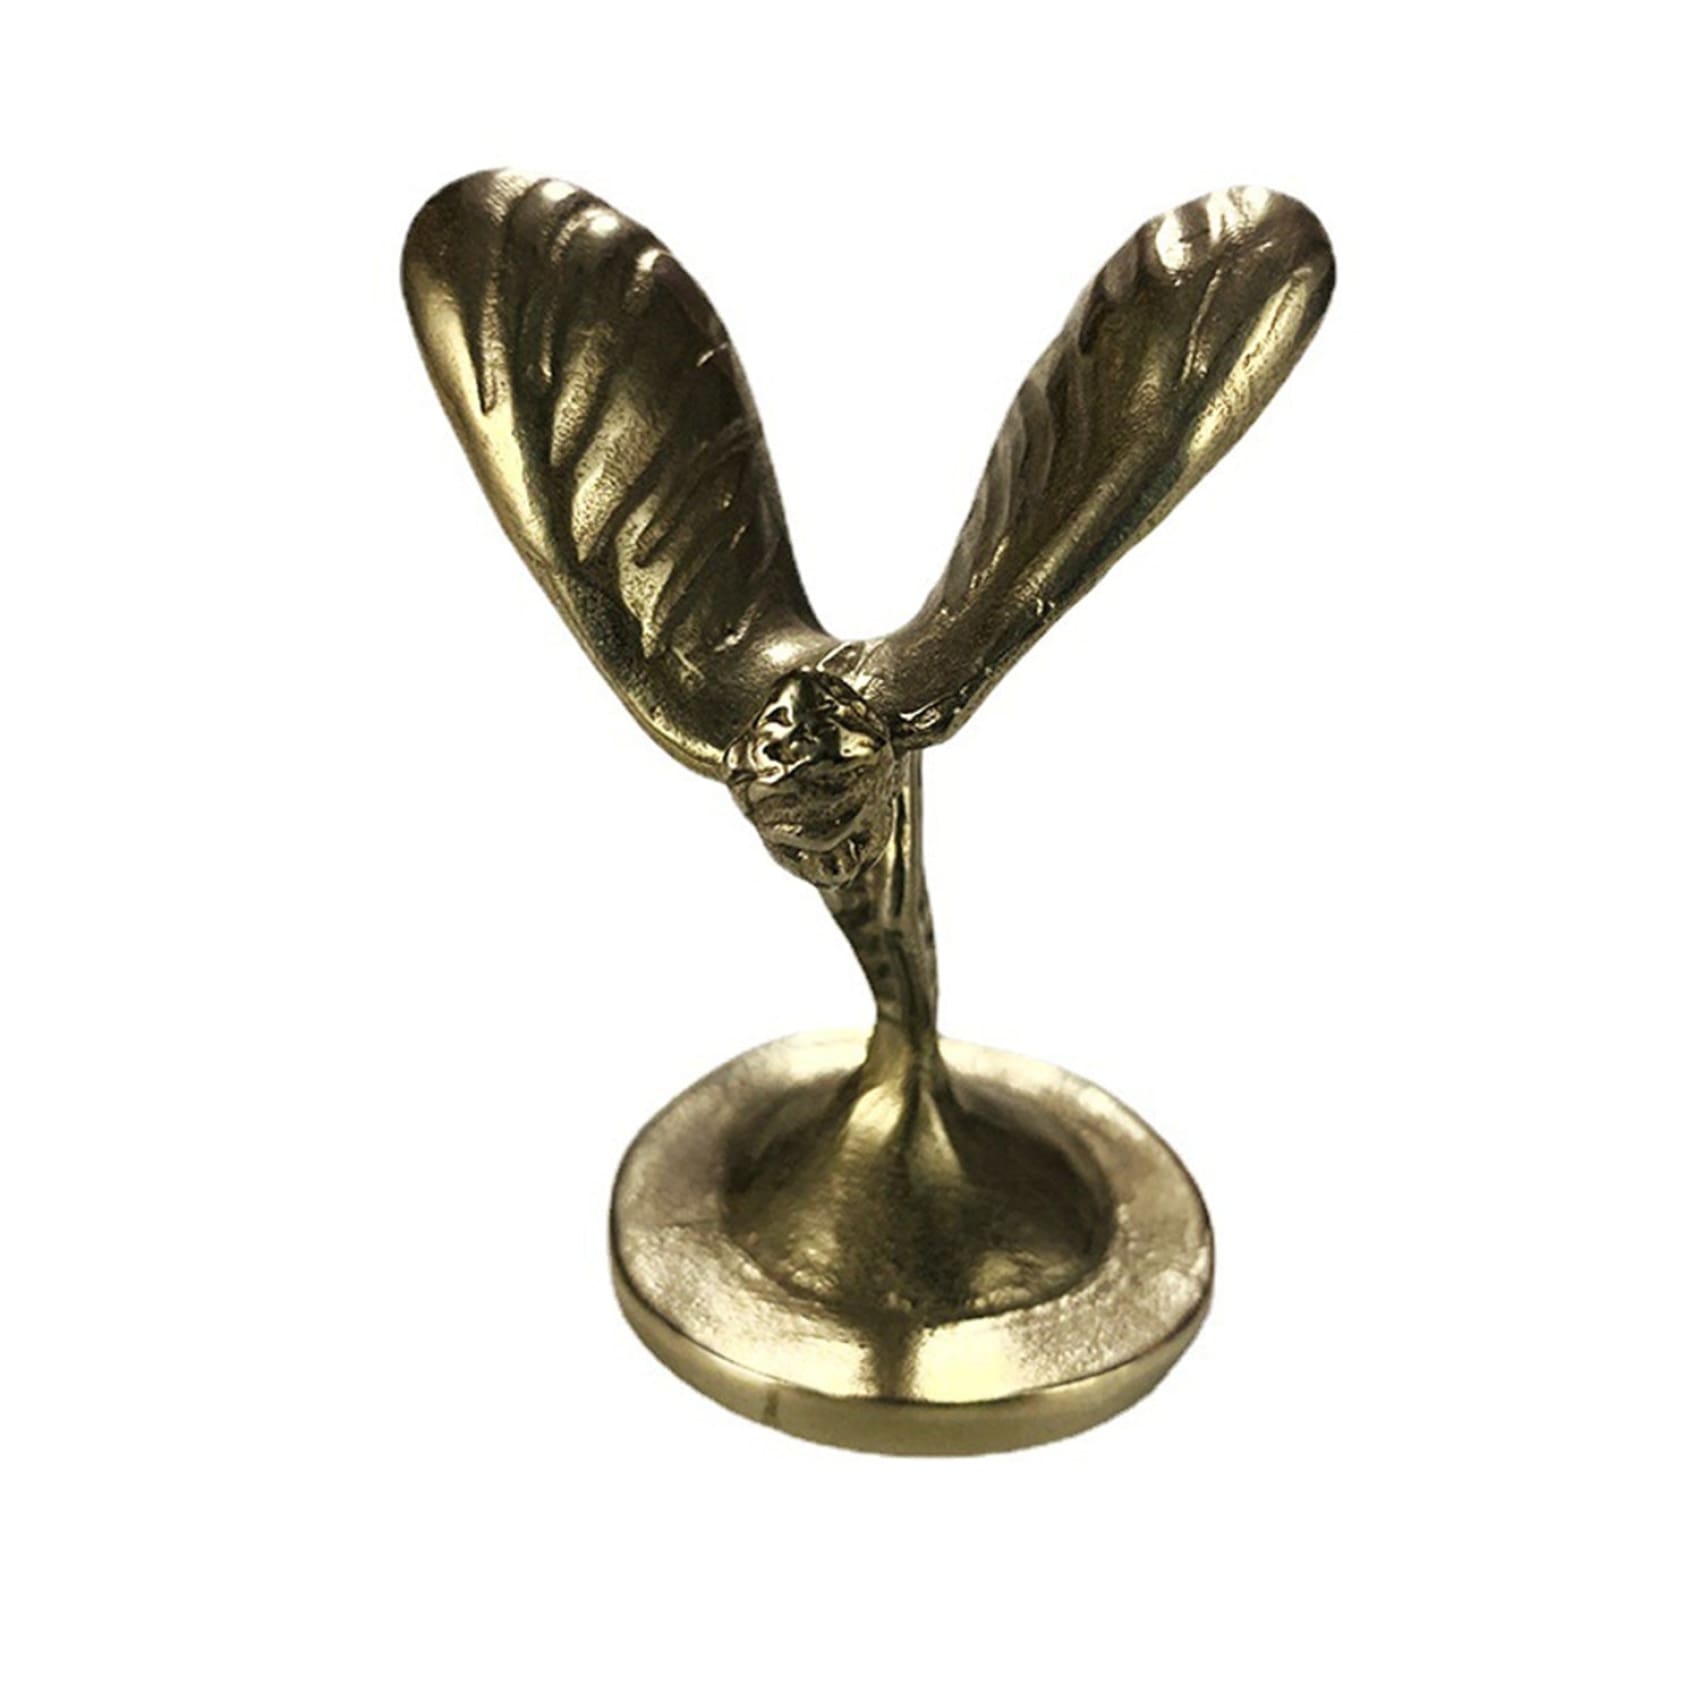 Angel Wing Home Decor Ornaments,Christmas Gifts,Handmade Copper Statue